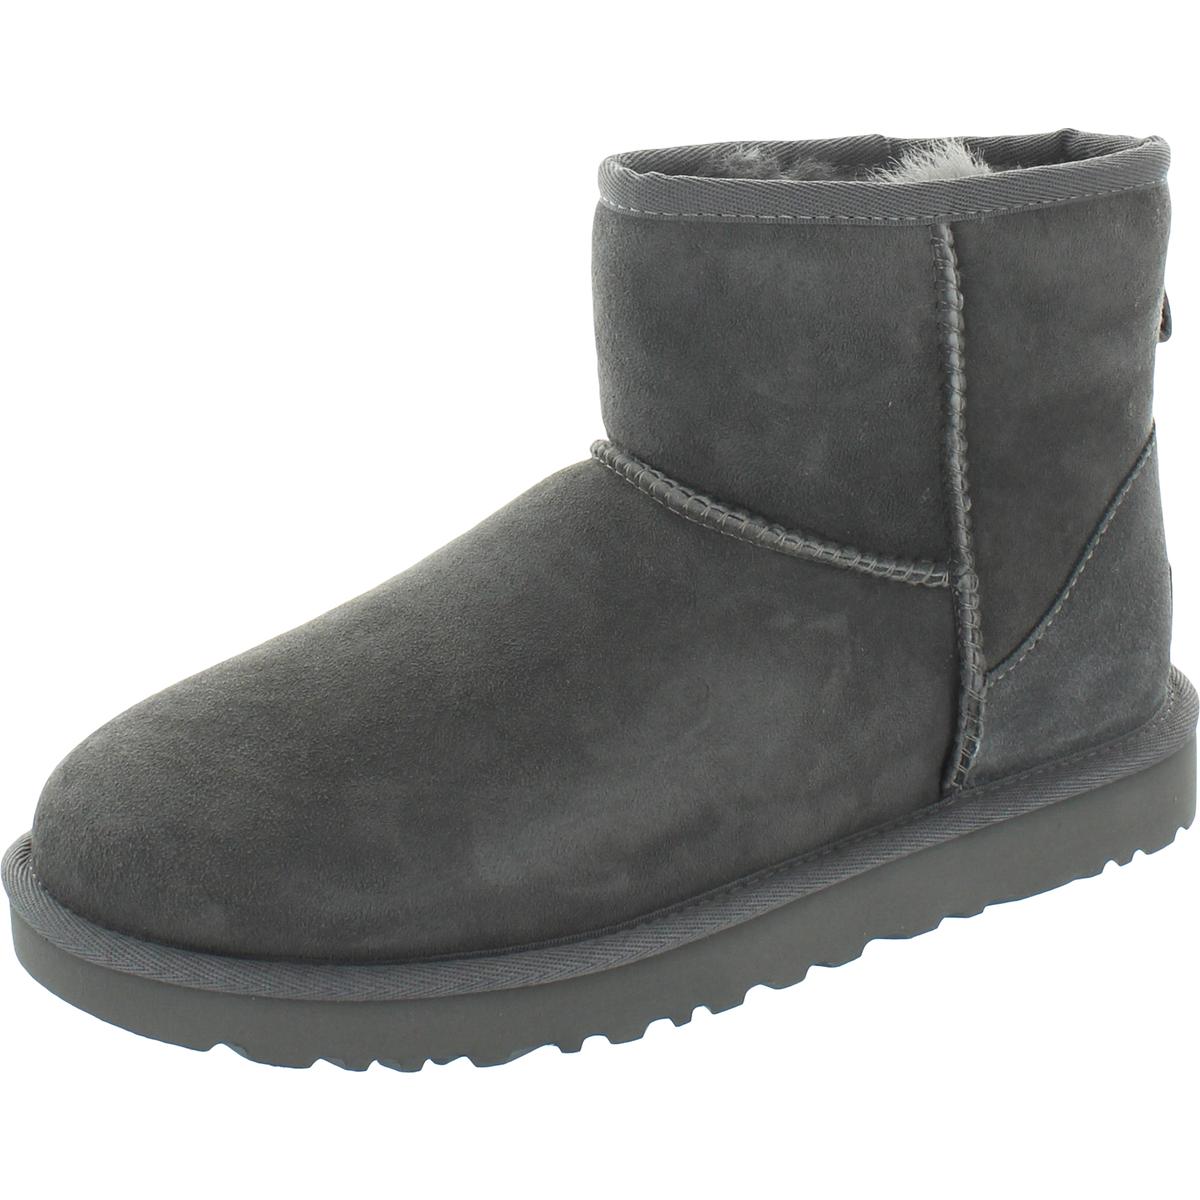 UGG Classic Mini II Gray Boot, Size 7 for Women for sale online | eBay